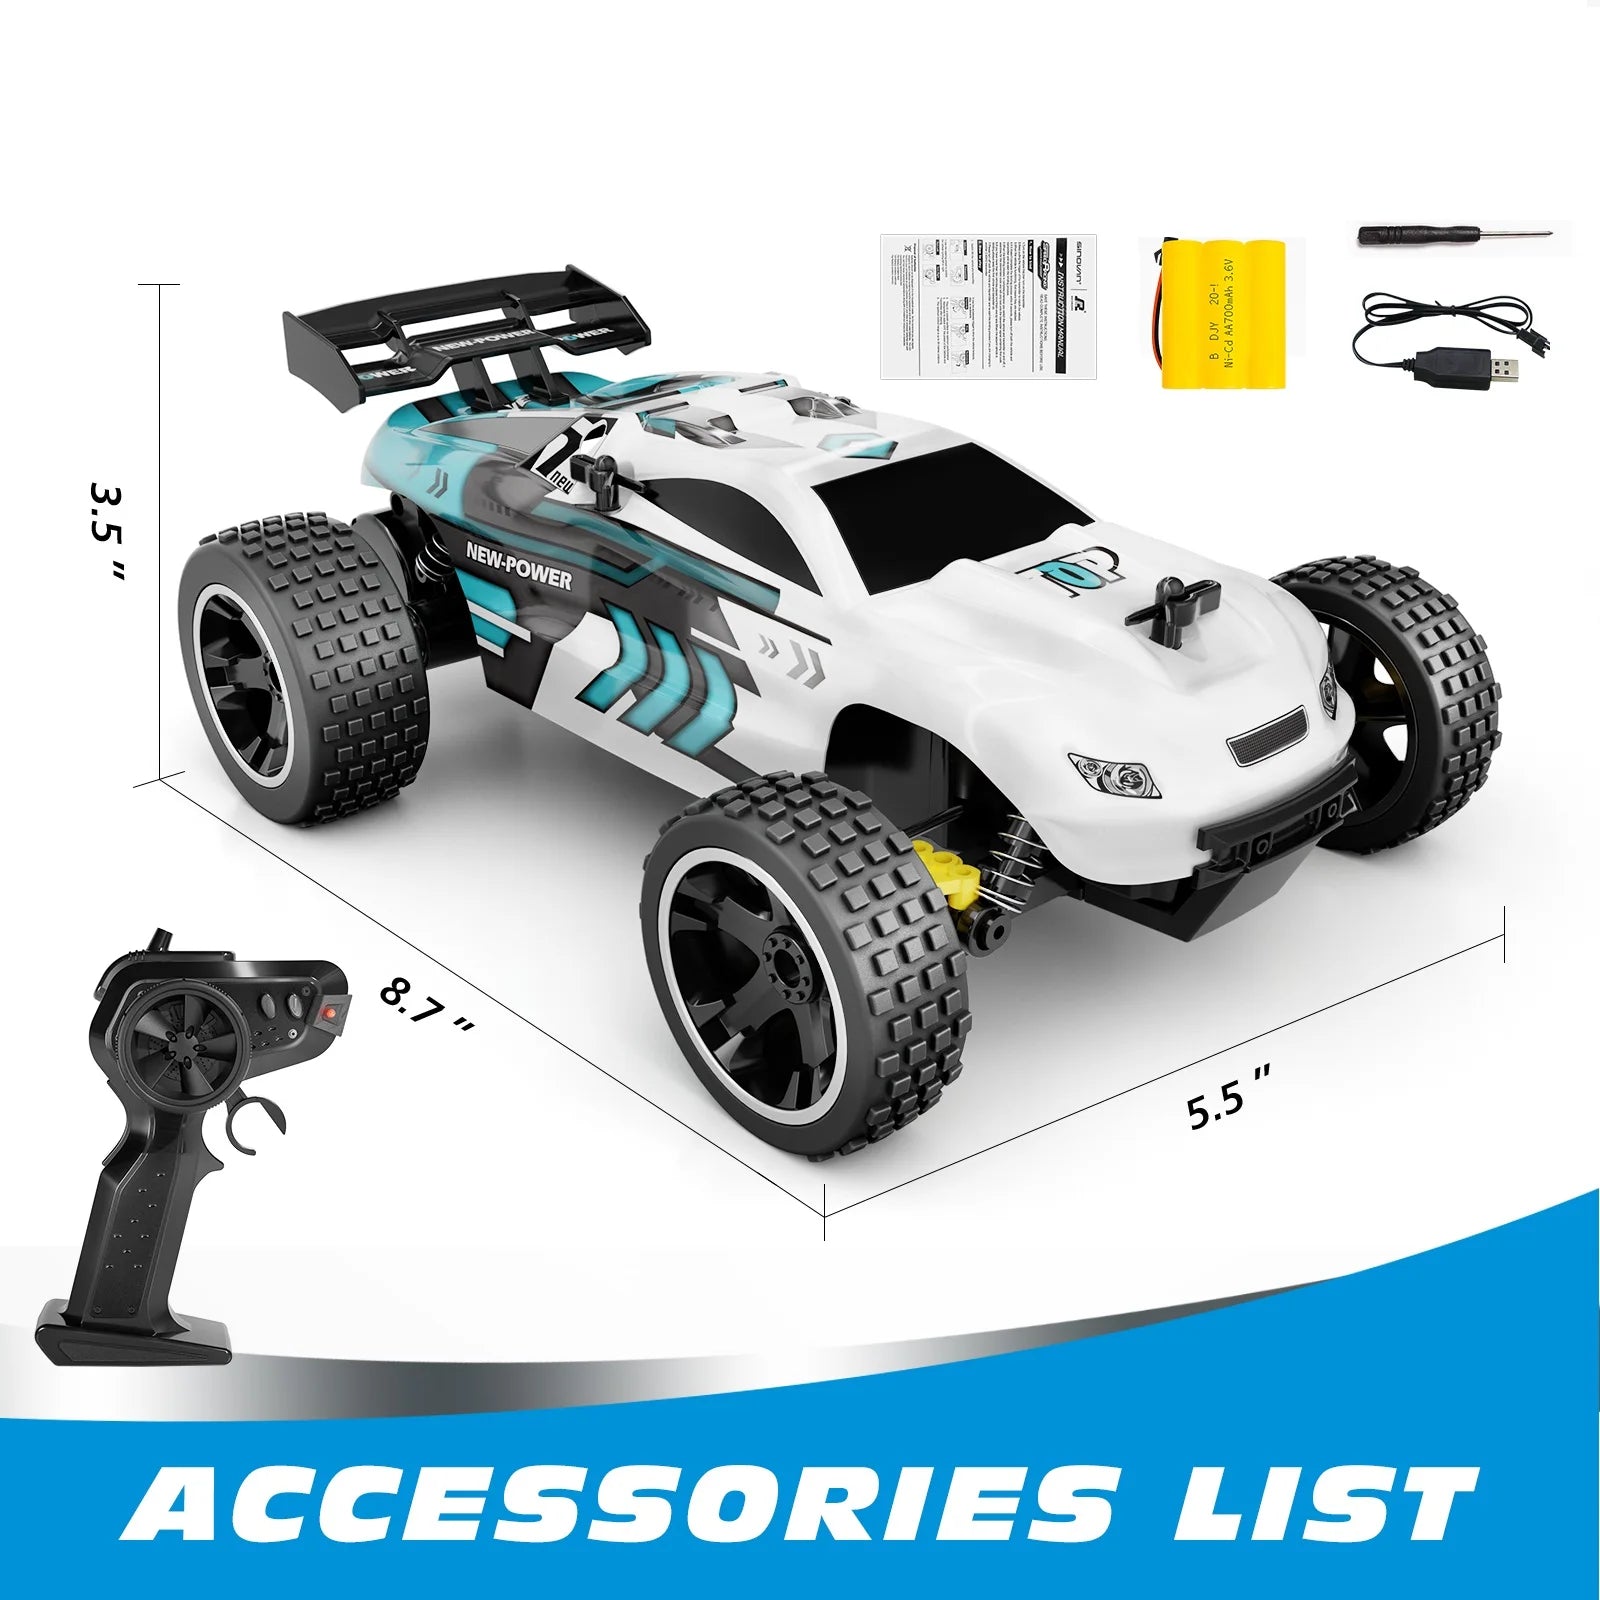 : 12+y Package includes : Batteries,Operating Instructions,Re